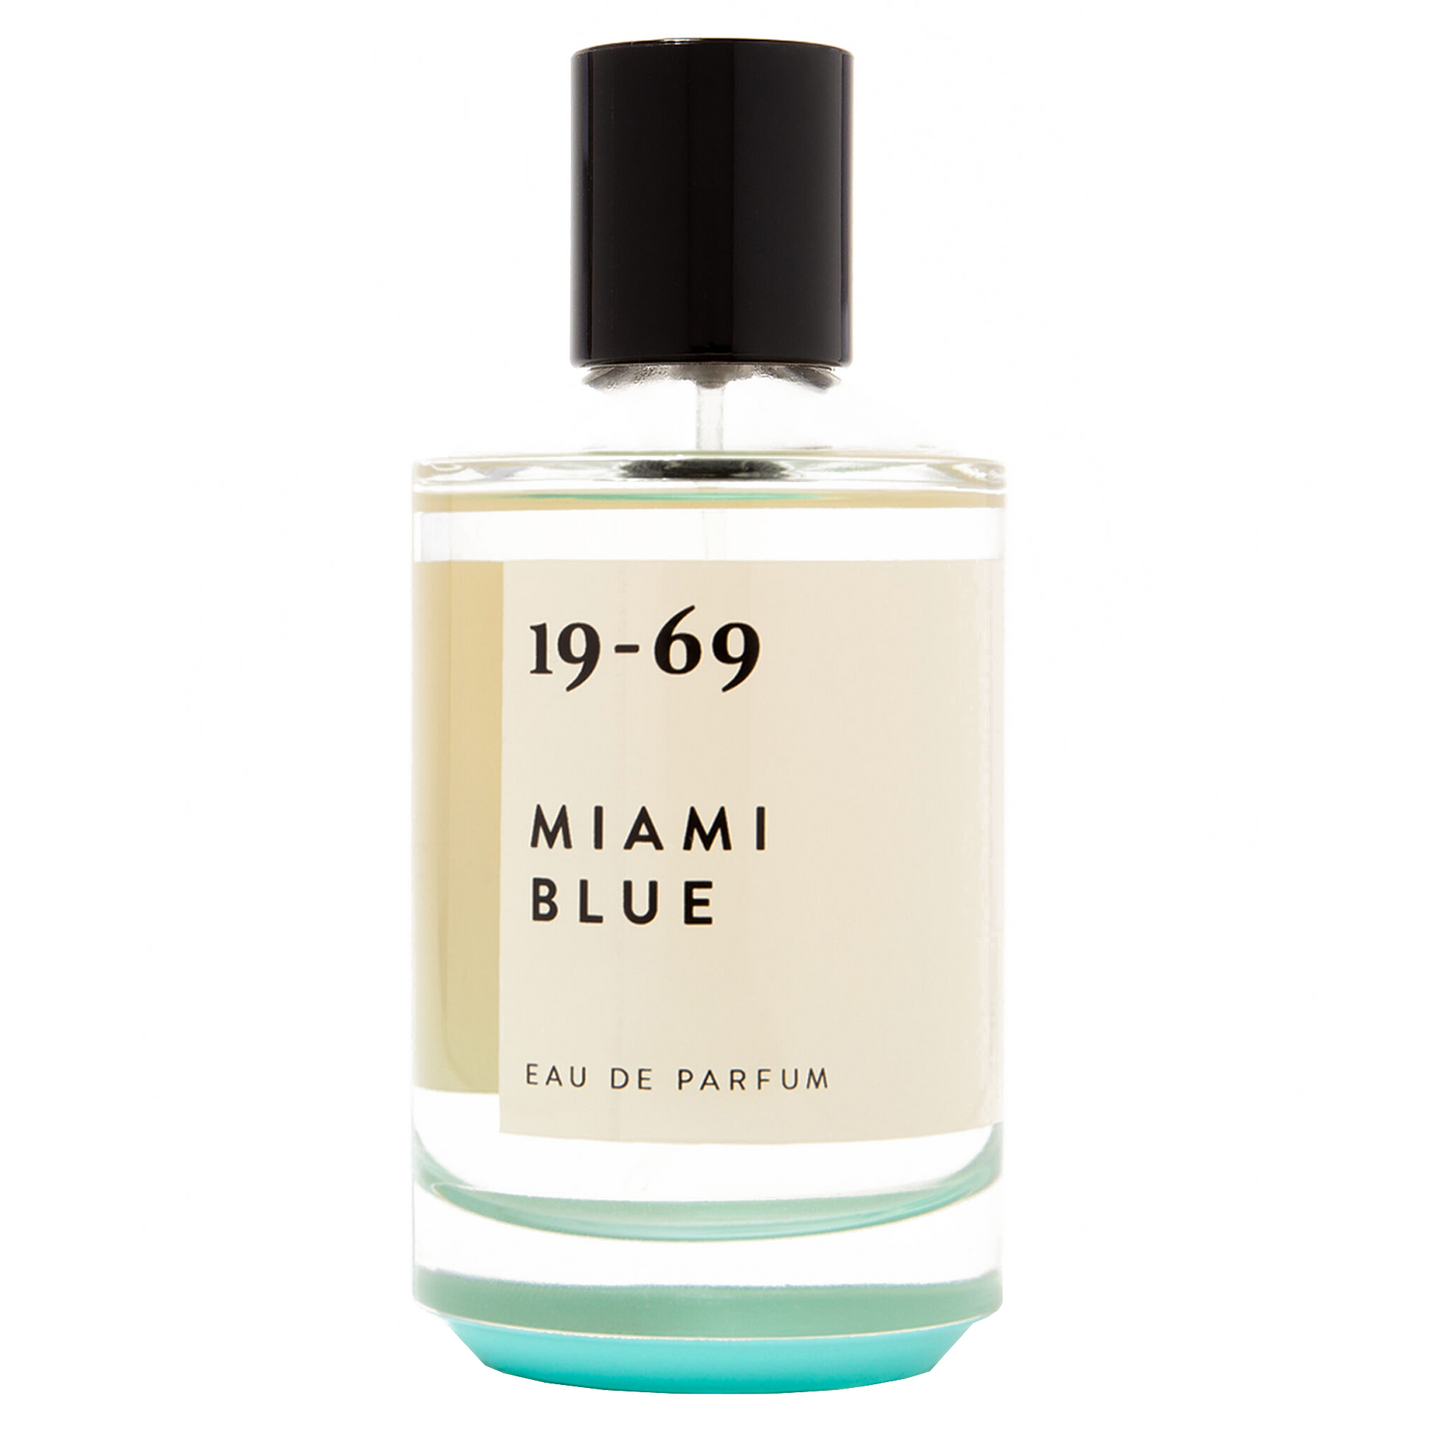 19-69 Miami Blue Perfume: Dedicated to an era in Miami when champagne baths were on the charts. Referred to as Paradise Lost in the 1980s and the tv-show Miami Vice was all the rage.  The scent is fresh and aquatic. Fragrance notes include Lemon, Ginger and Cocaine Accord. All 19-69 fragrances are suitable for any gender.